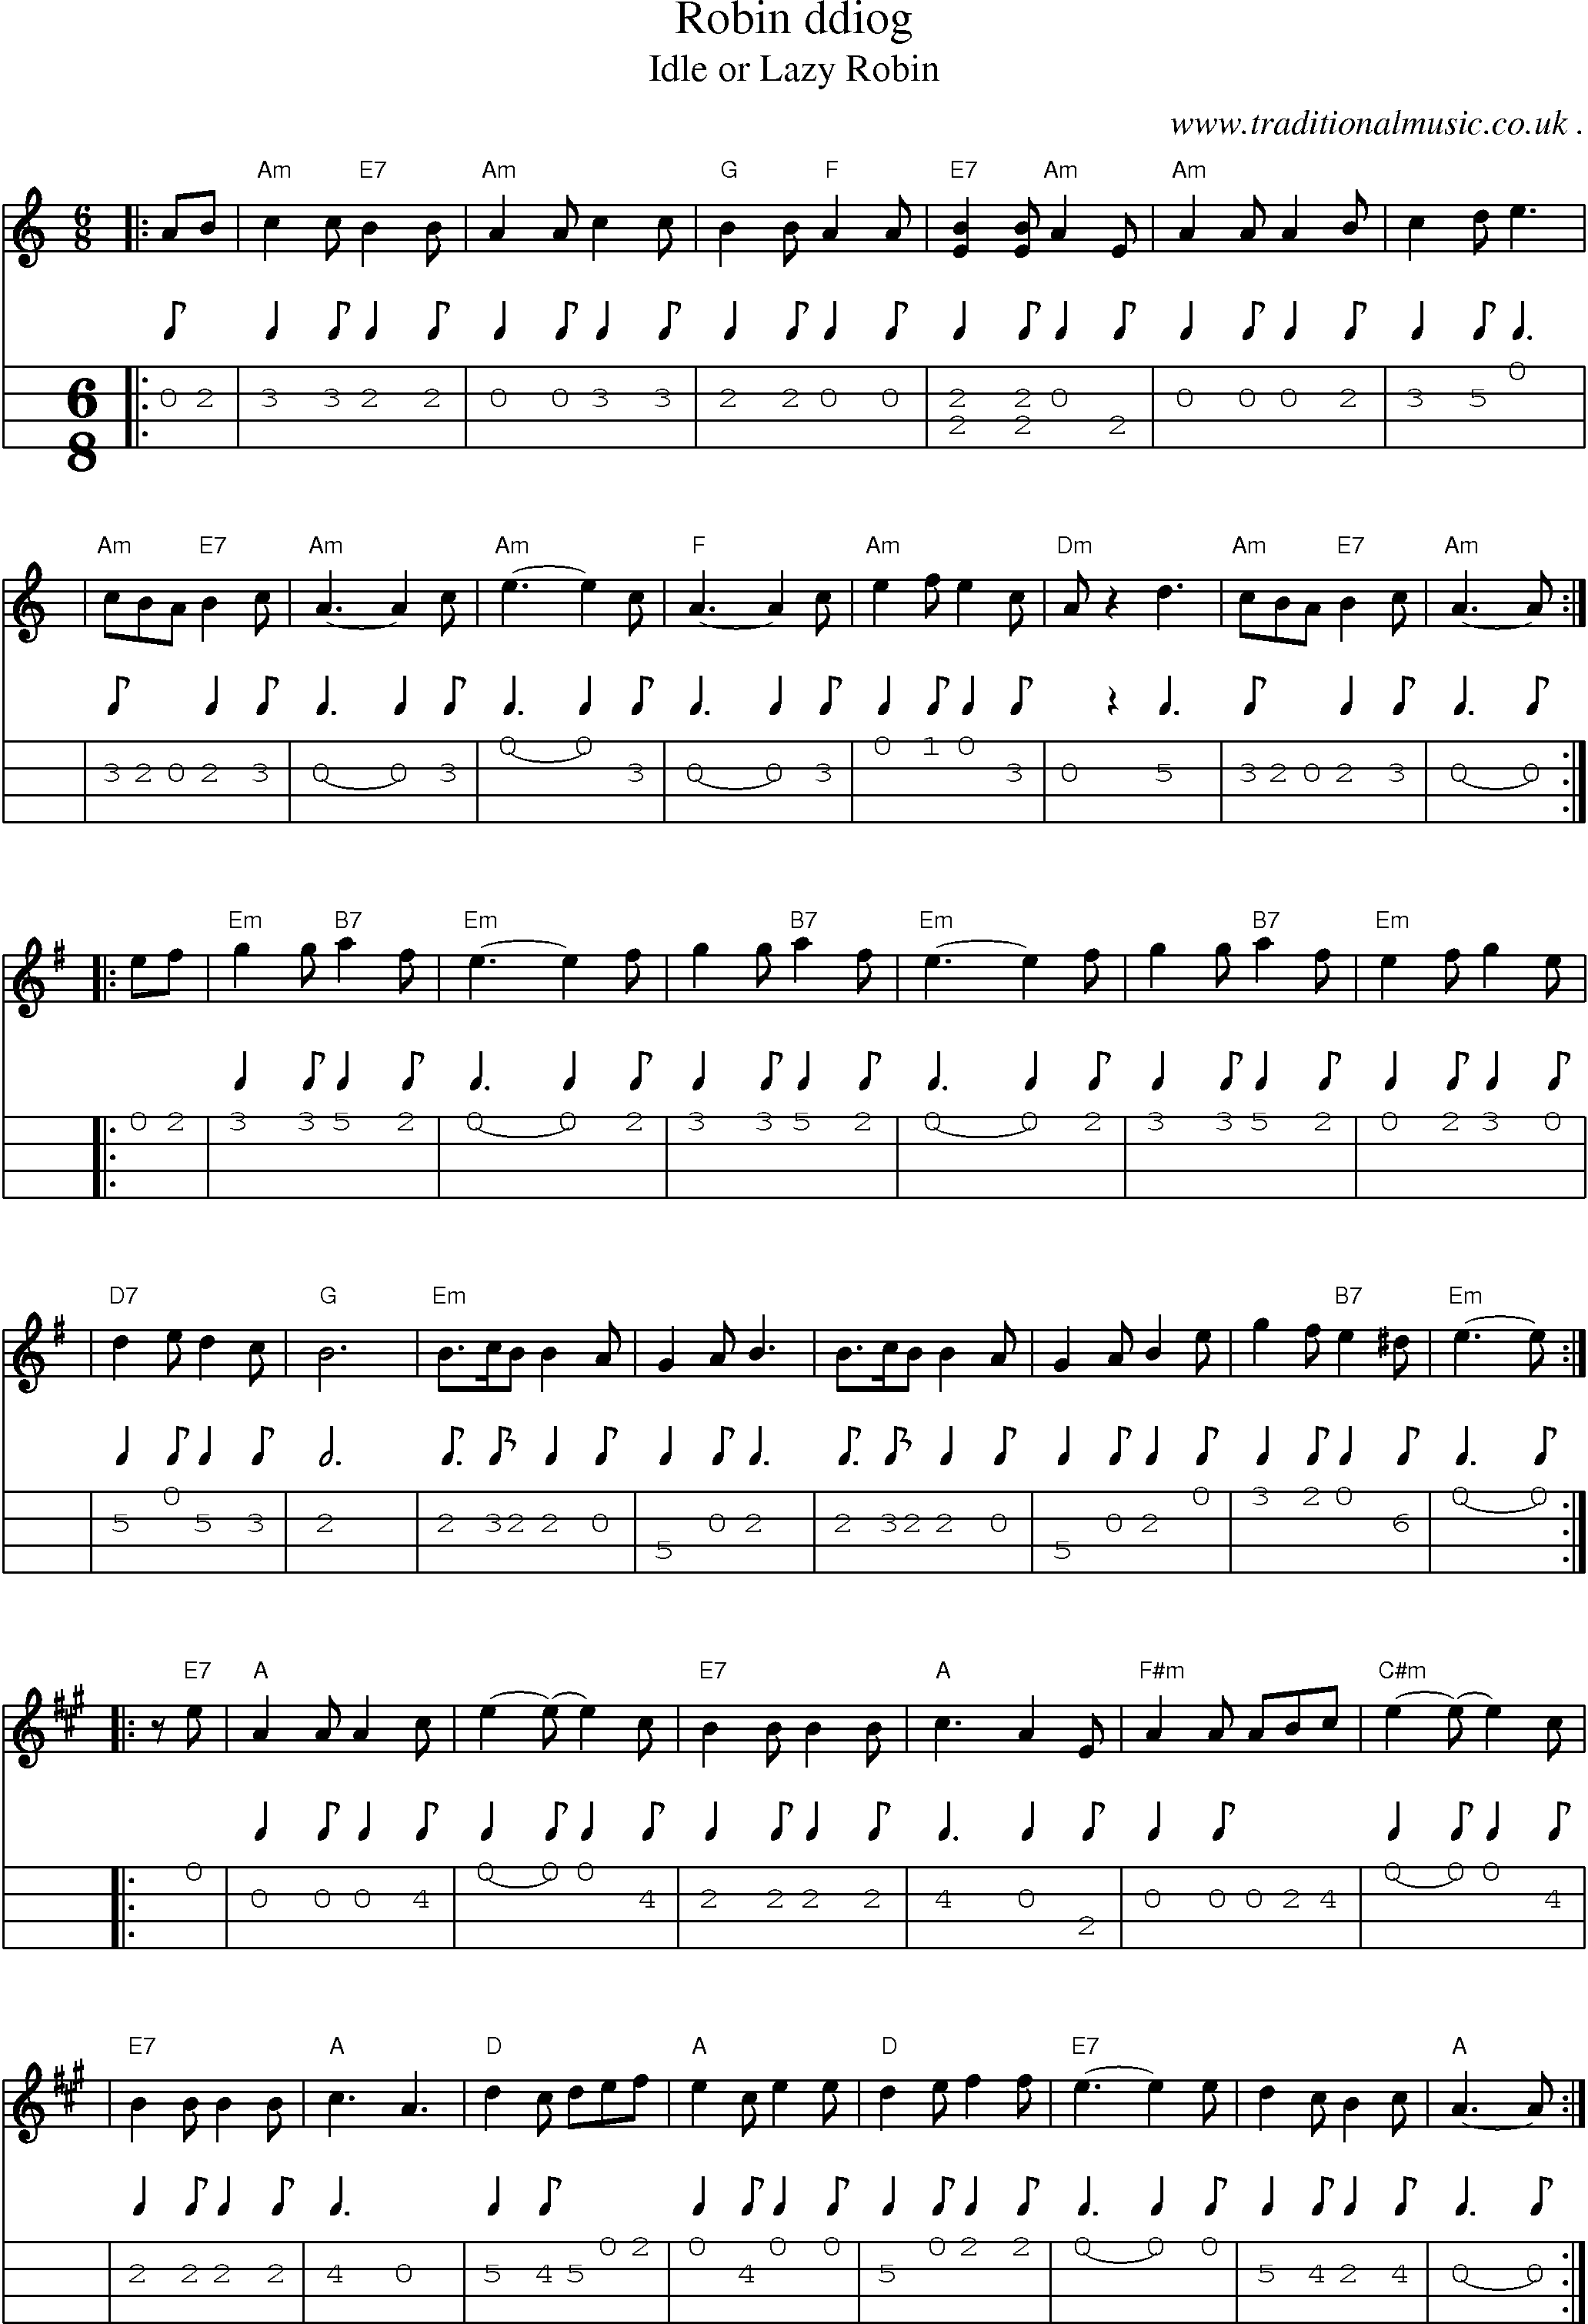 Sheet-music  score, Chords and Mandolin Tabs for Robin Ddiog